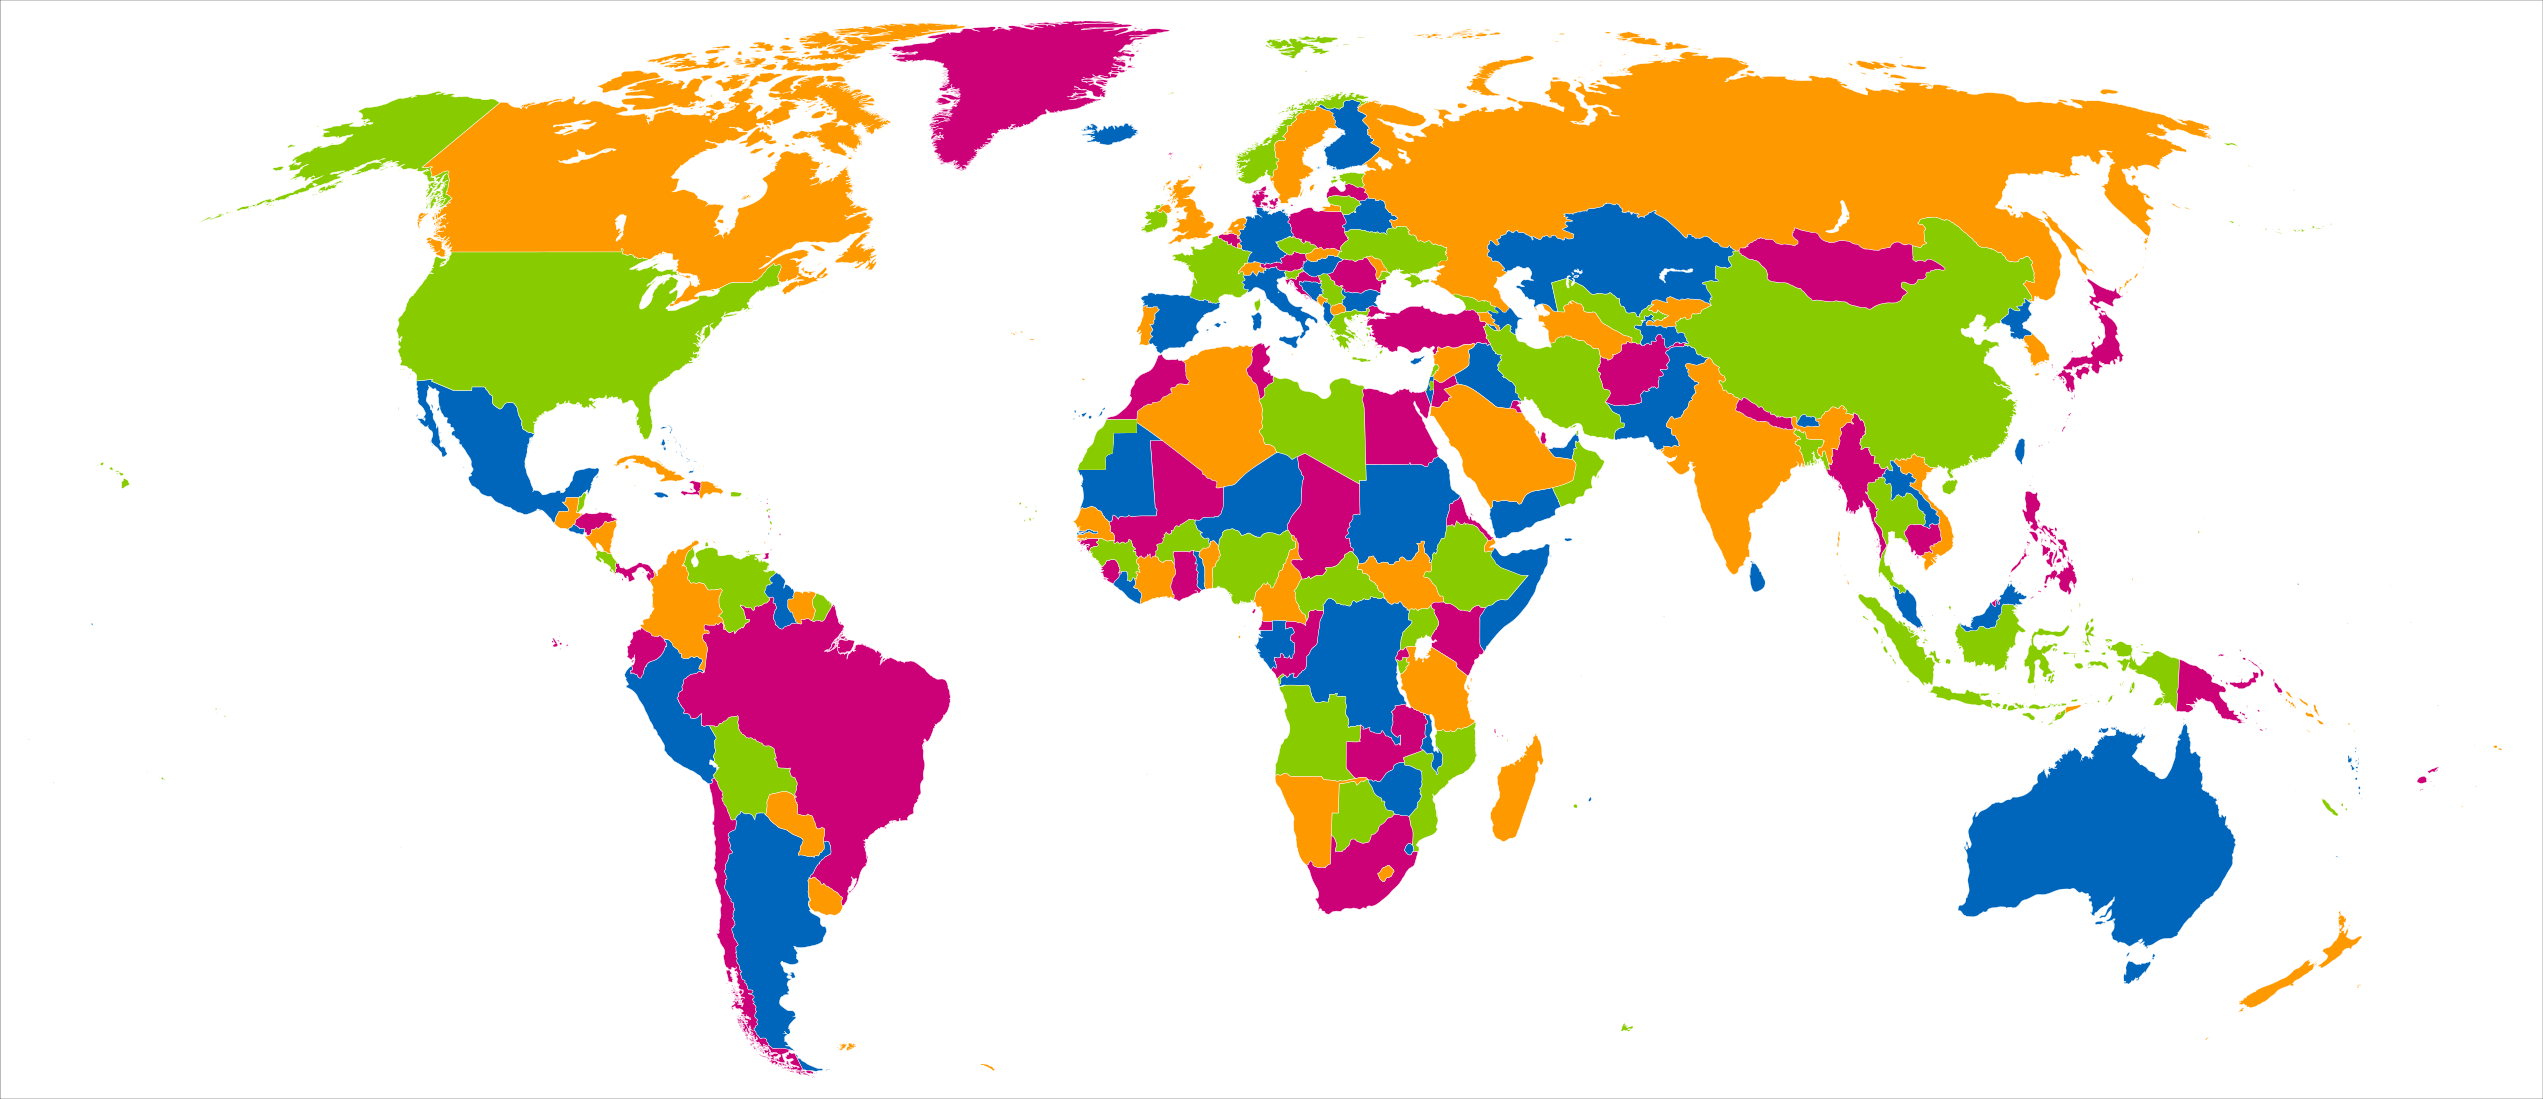 4 Colour Theorem All The World S Countries Can Be Coloured Using Only 4 Colours So That No Two Adjacent Countries Share The Same Colour Brilliant Maps